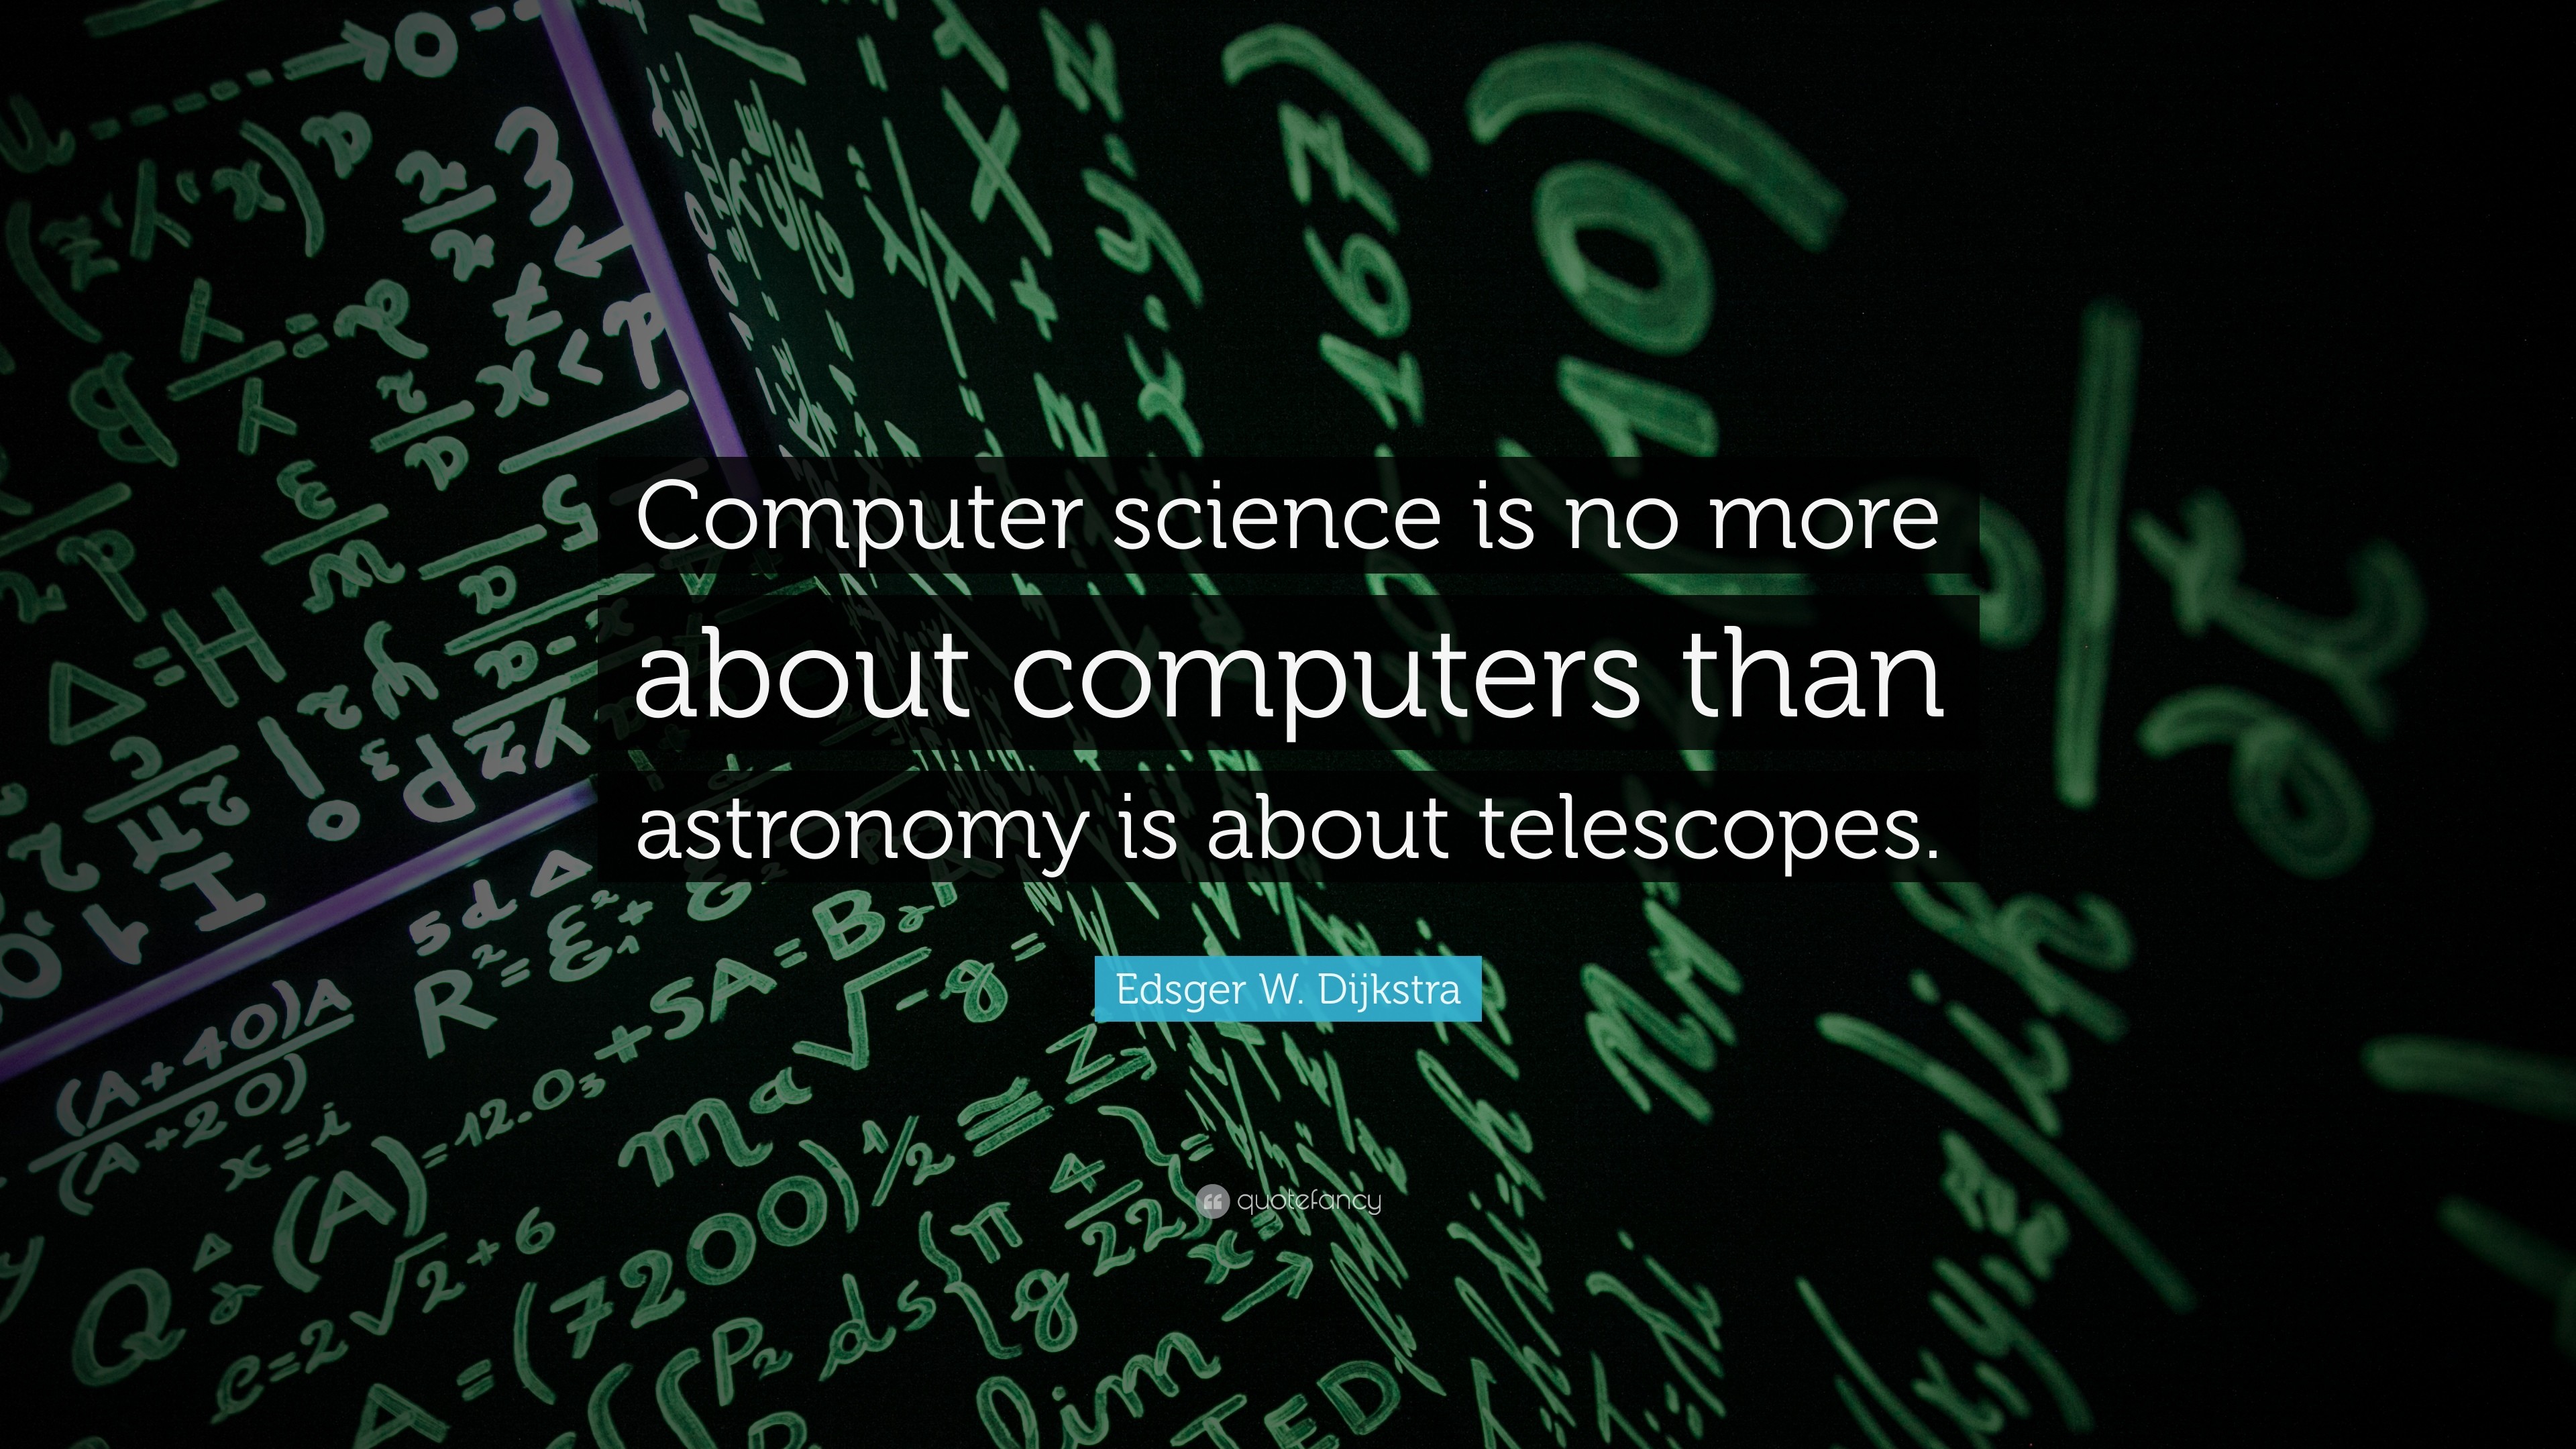 Edsger W. Dijkstra Quote: “Computer science is no more about computers than  astronomy